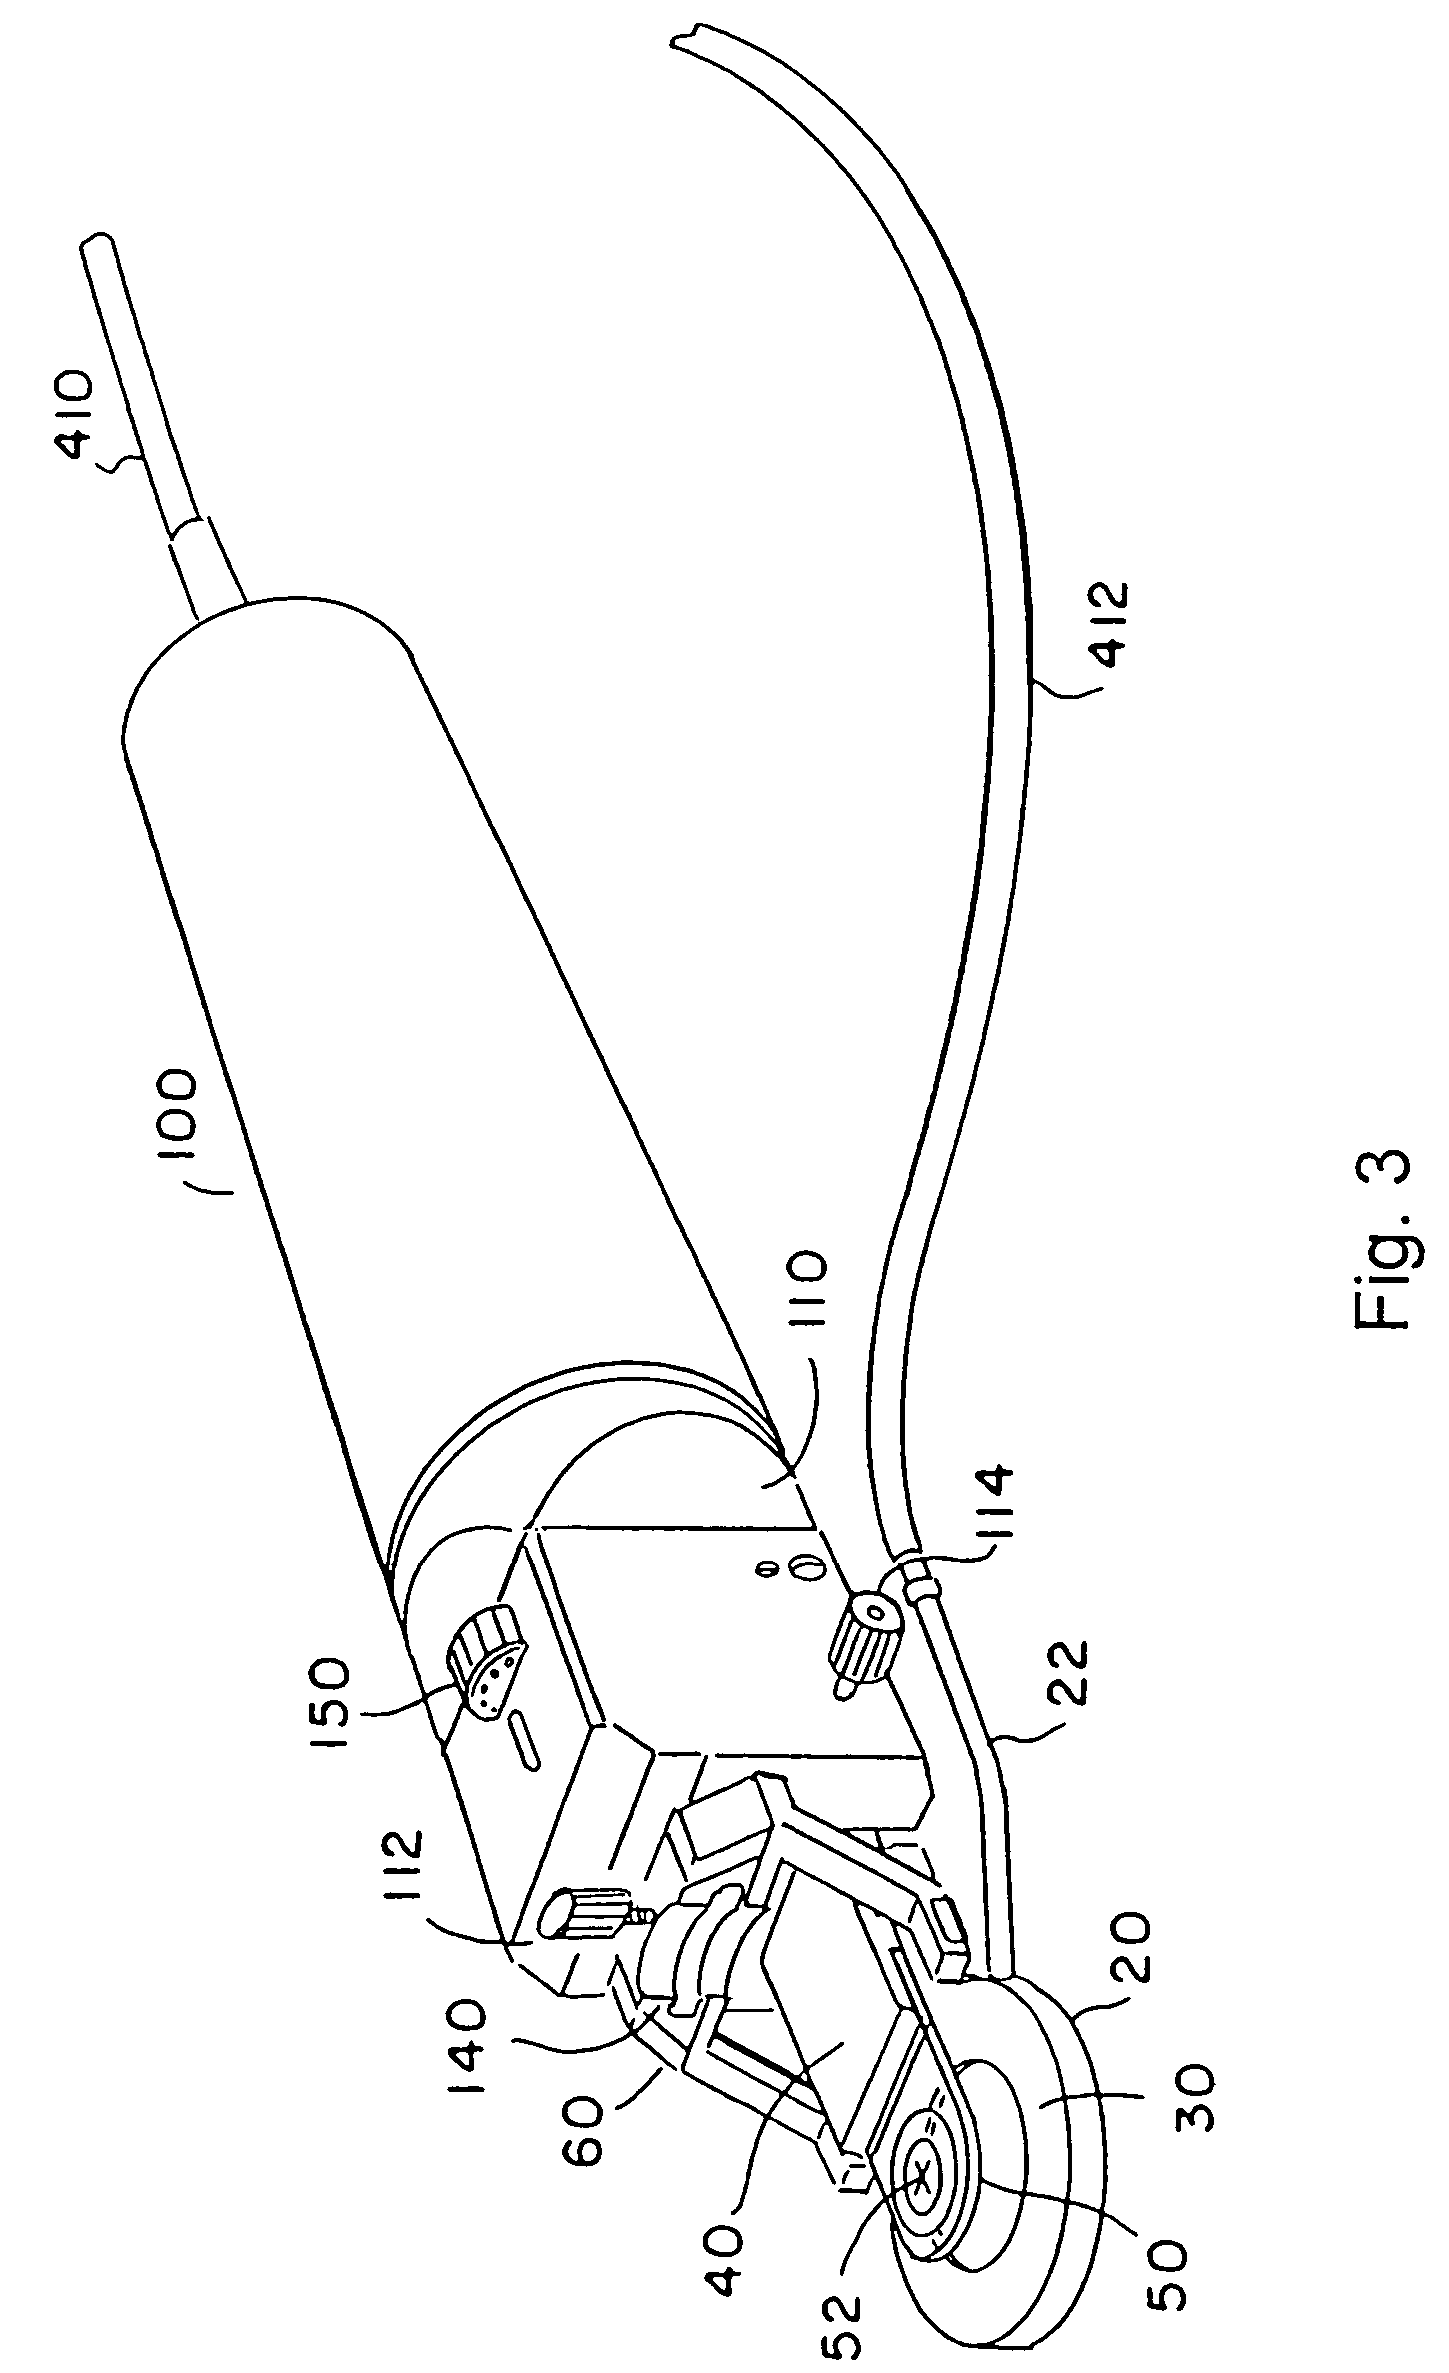 Intracorneal lens placement method and apparatus